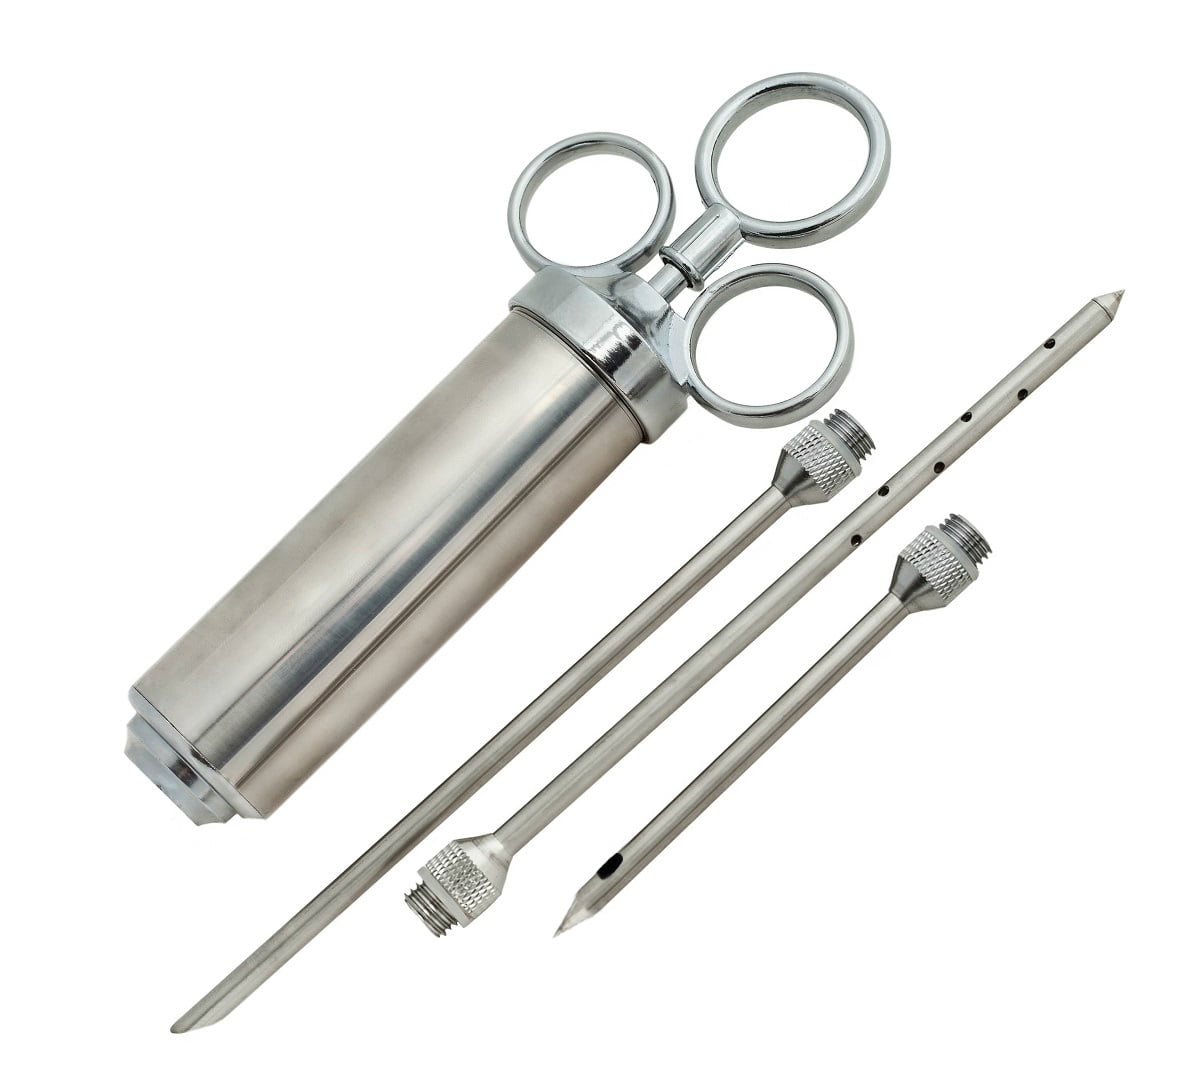 Outset Marinade Meat Injector With Removable Stainless-Steel